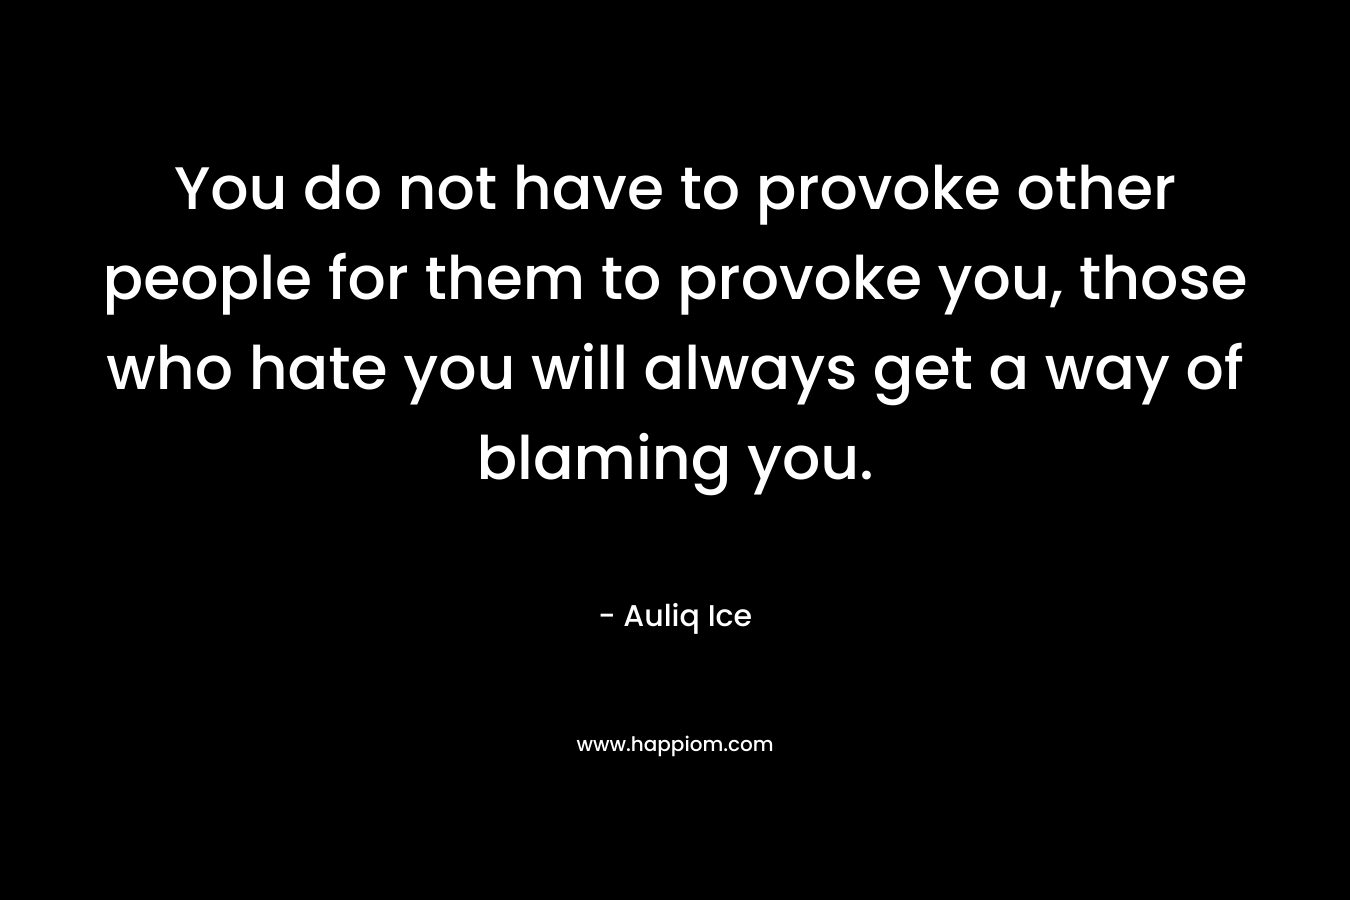 You do not have to provoke other people for them to provoke you, those who hate you will always get a way of blaming you. – Auliq Ice